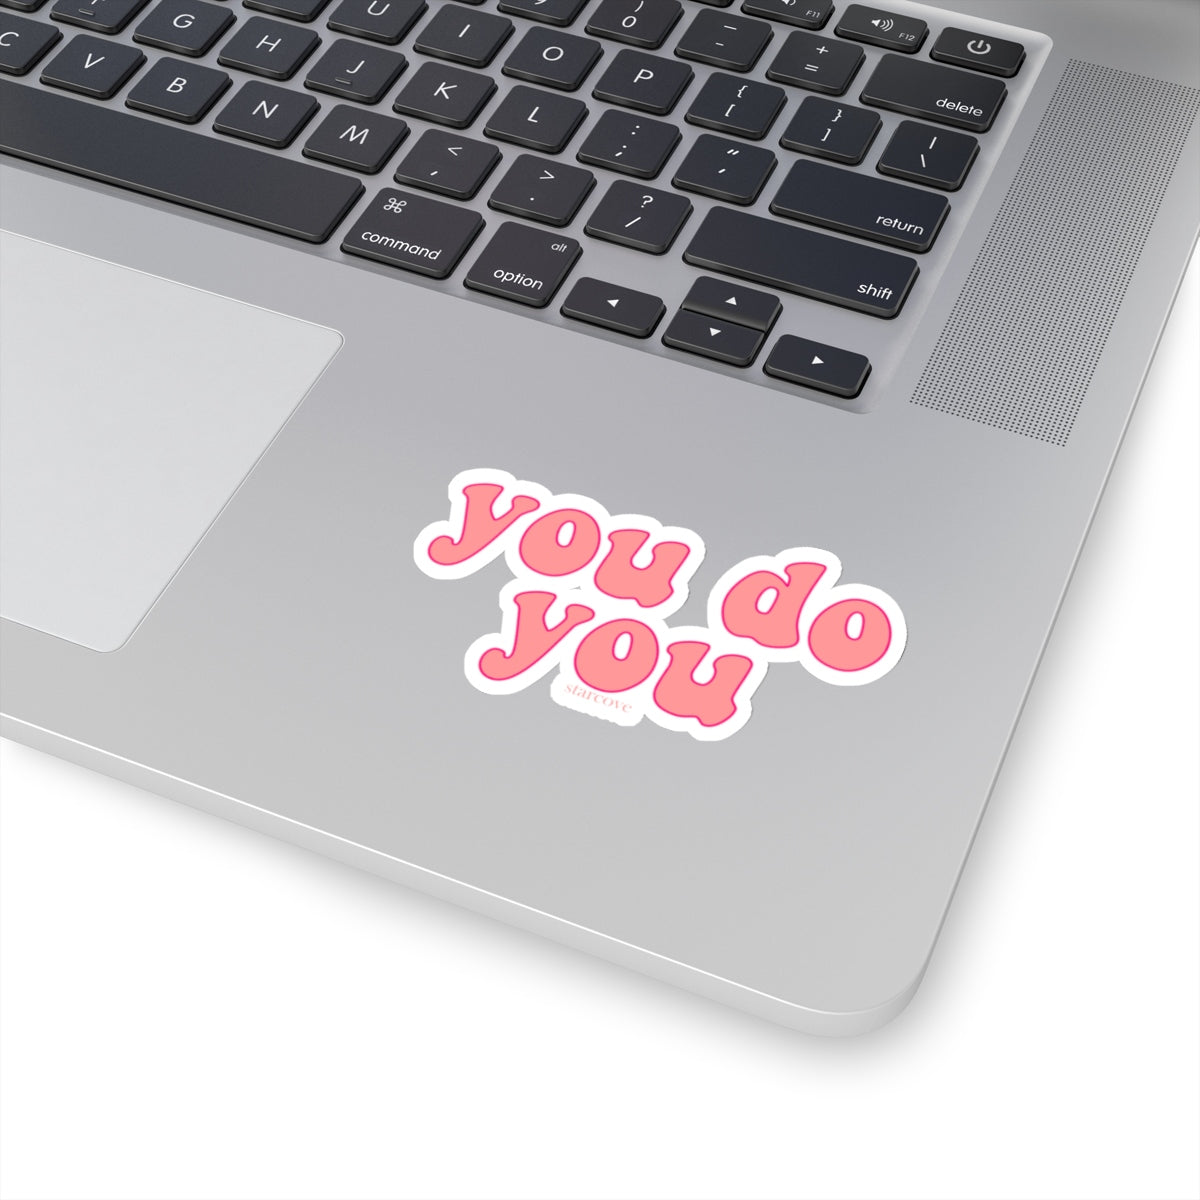 You Do You Stickers Laptop Vinyl Cute Waterproof for Waterbottle Tumbler Car Bumper Aesthetic Label Wall Decal Starcove Fashion